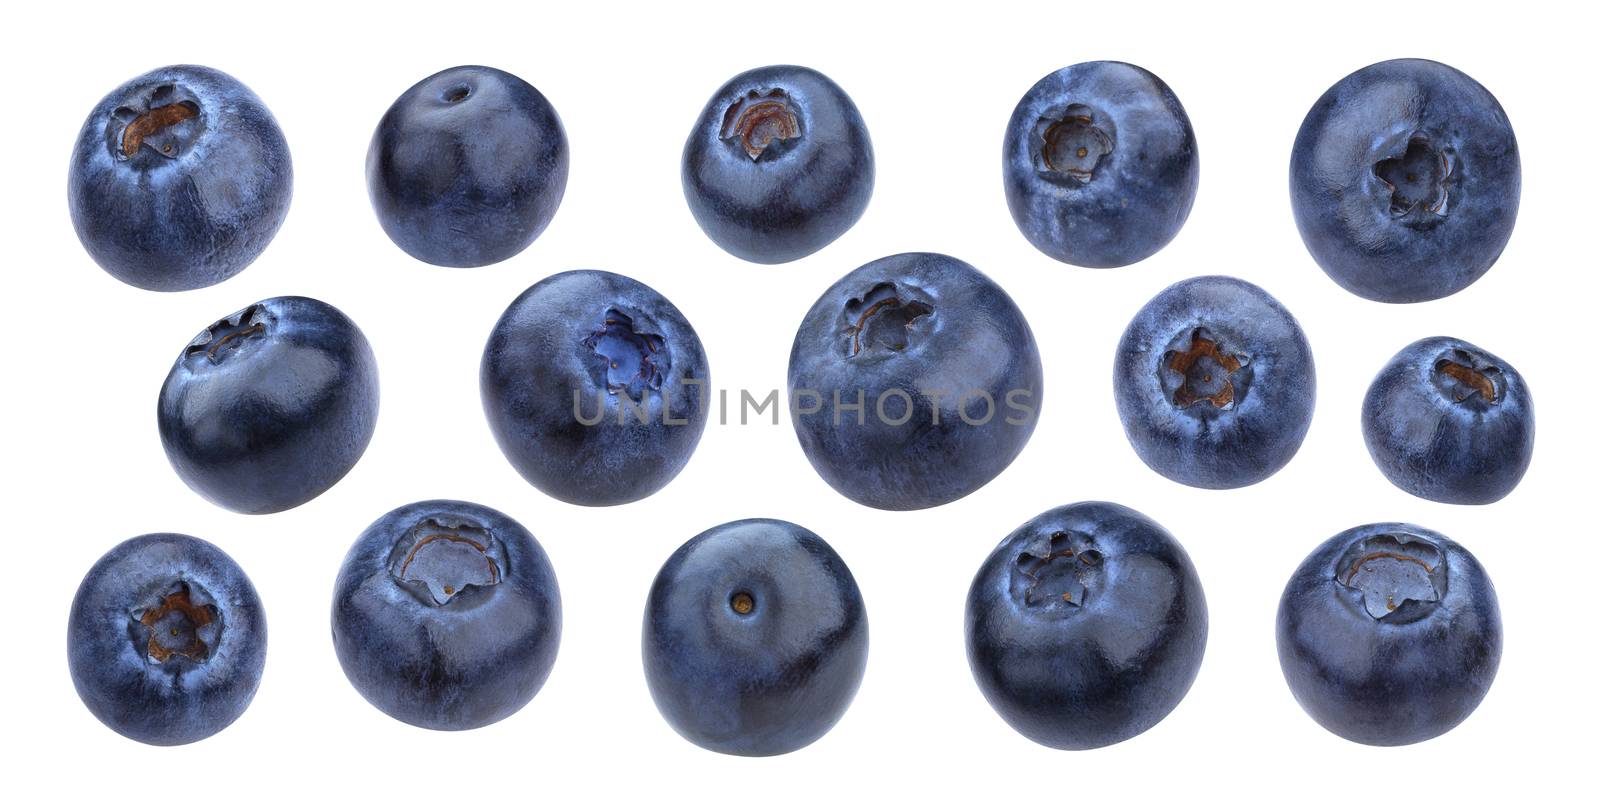 Blueberry isolated on white background with clipping path by xamtiw